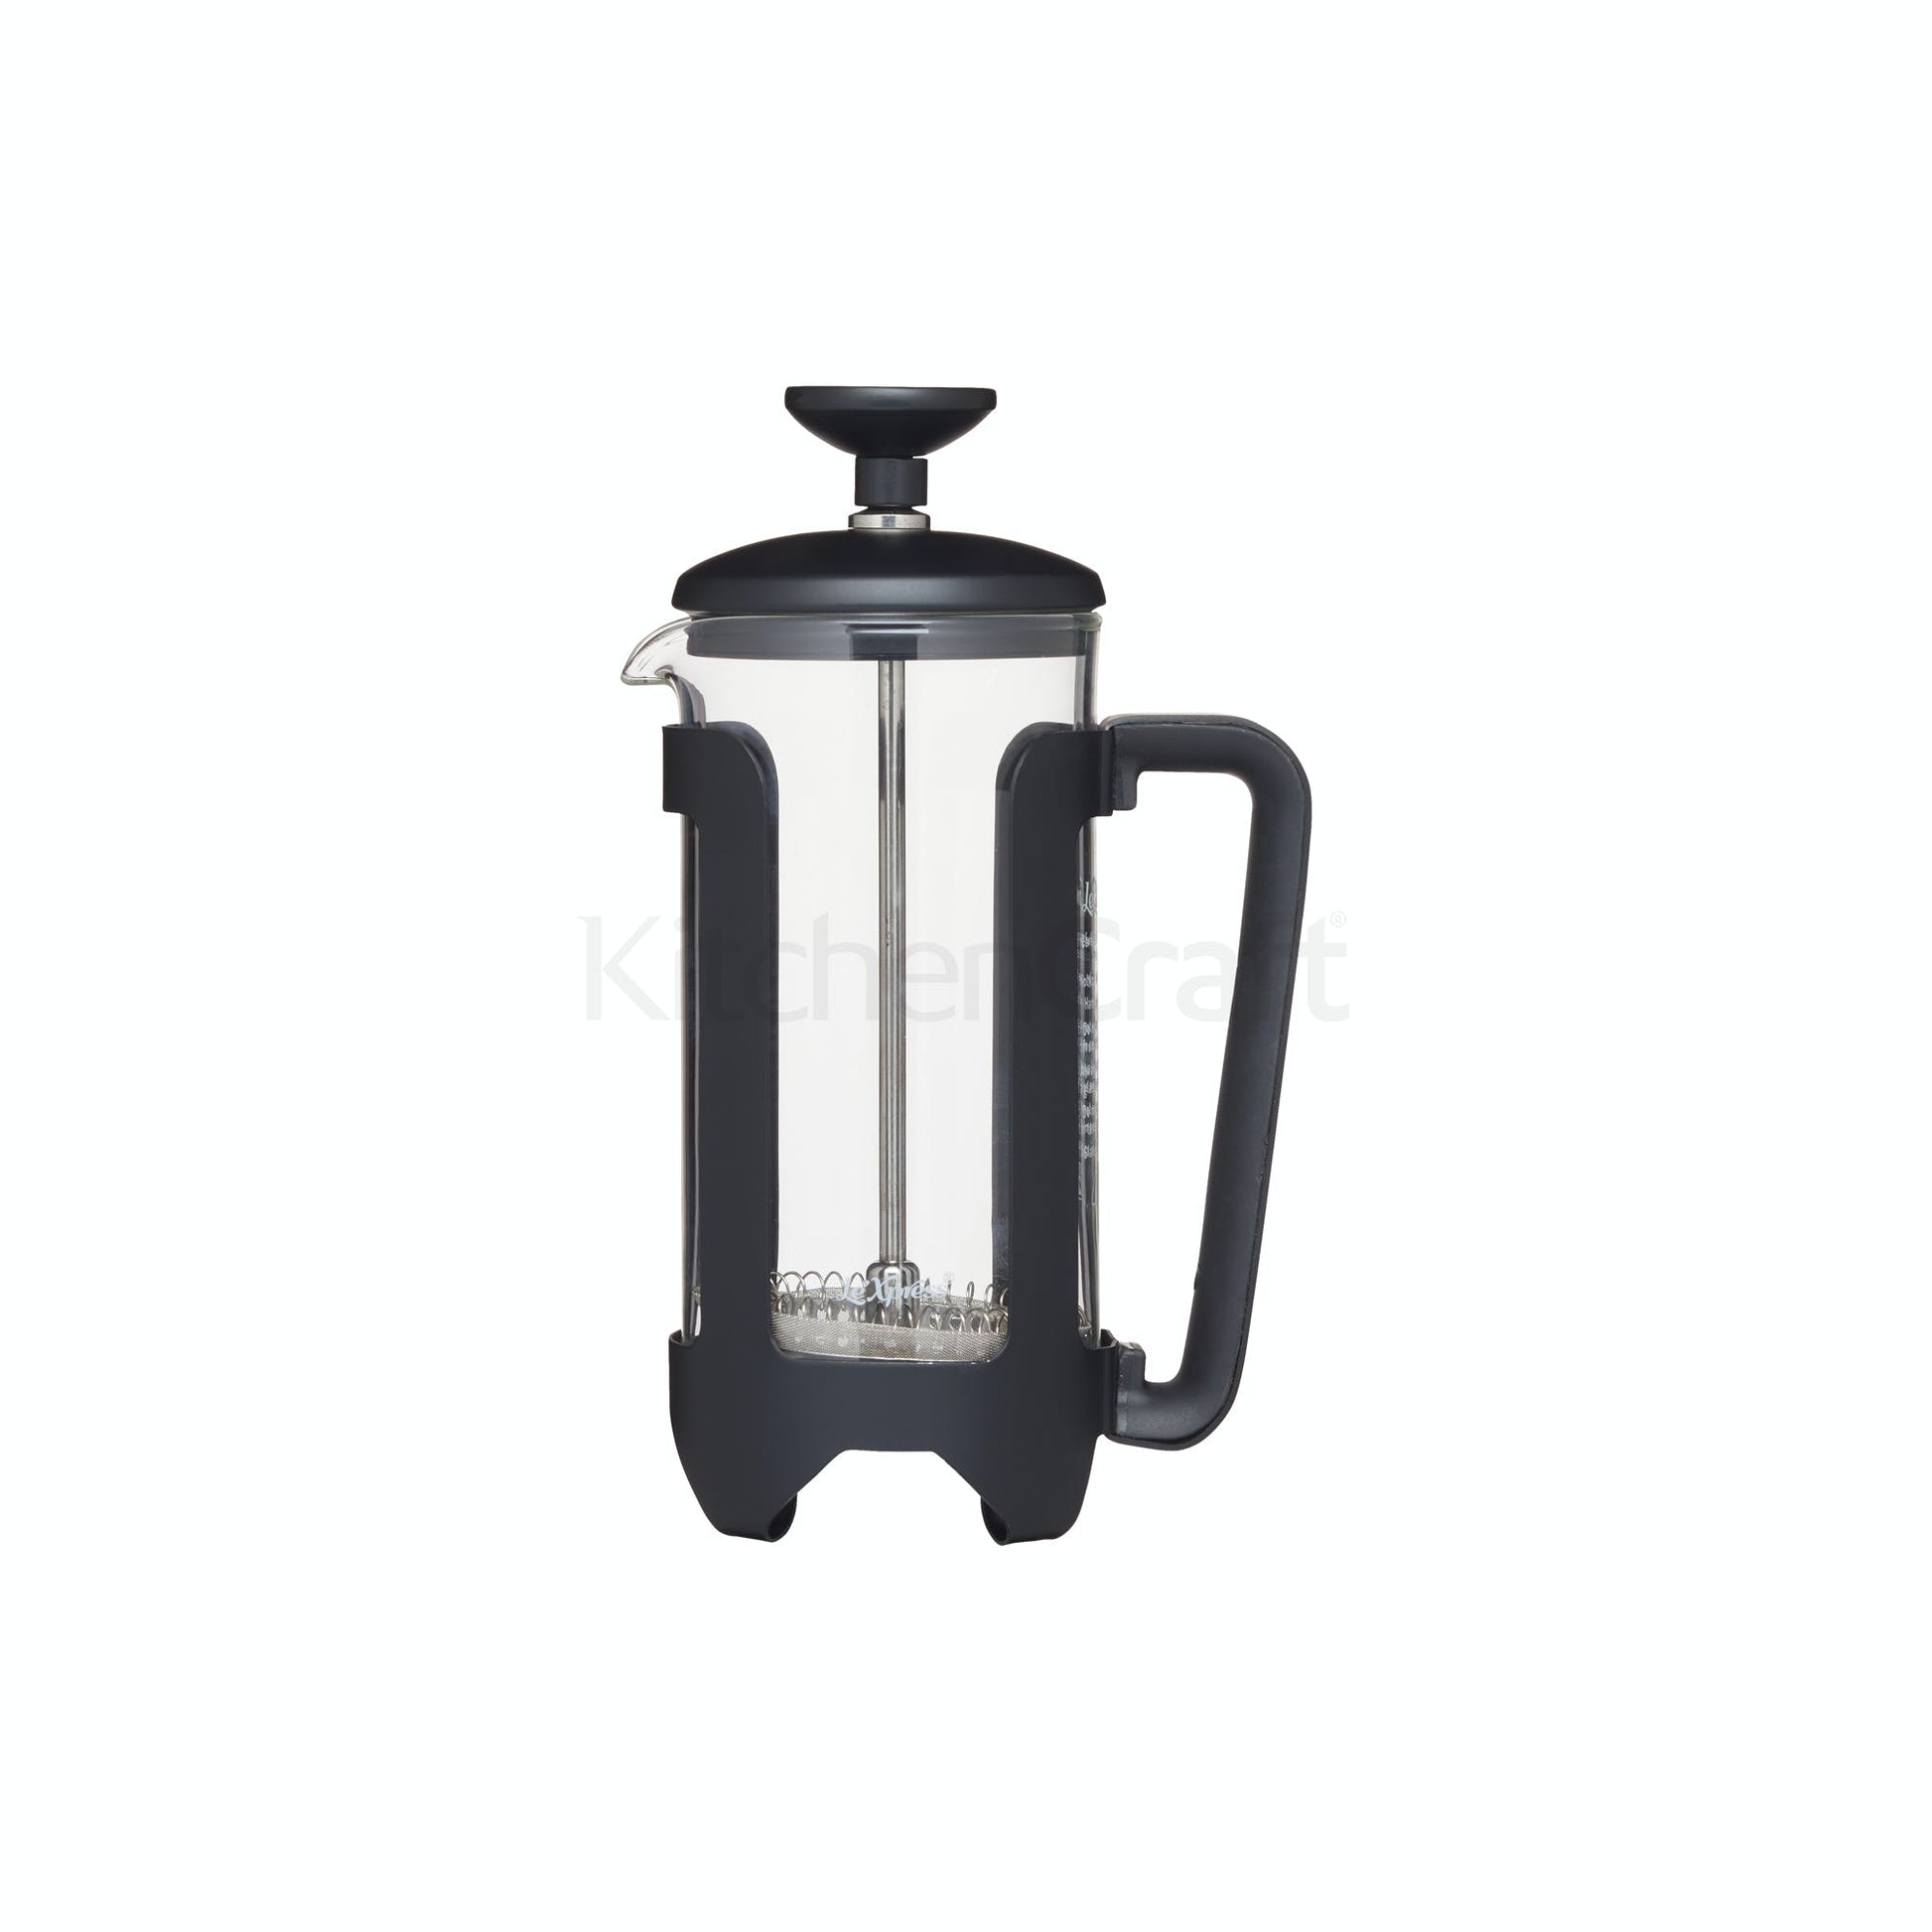 Le'Xpress Matt Black Stainless Steel French Press Cafetiere 3 Cup